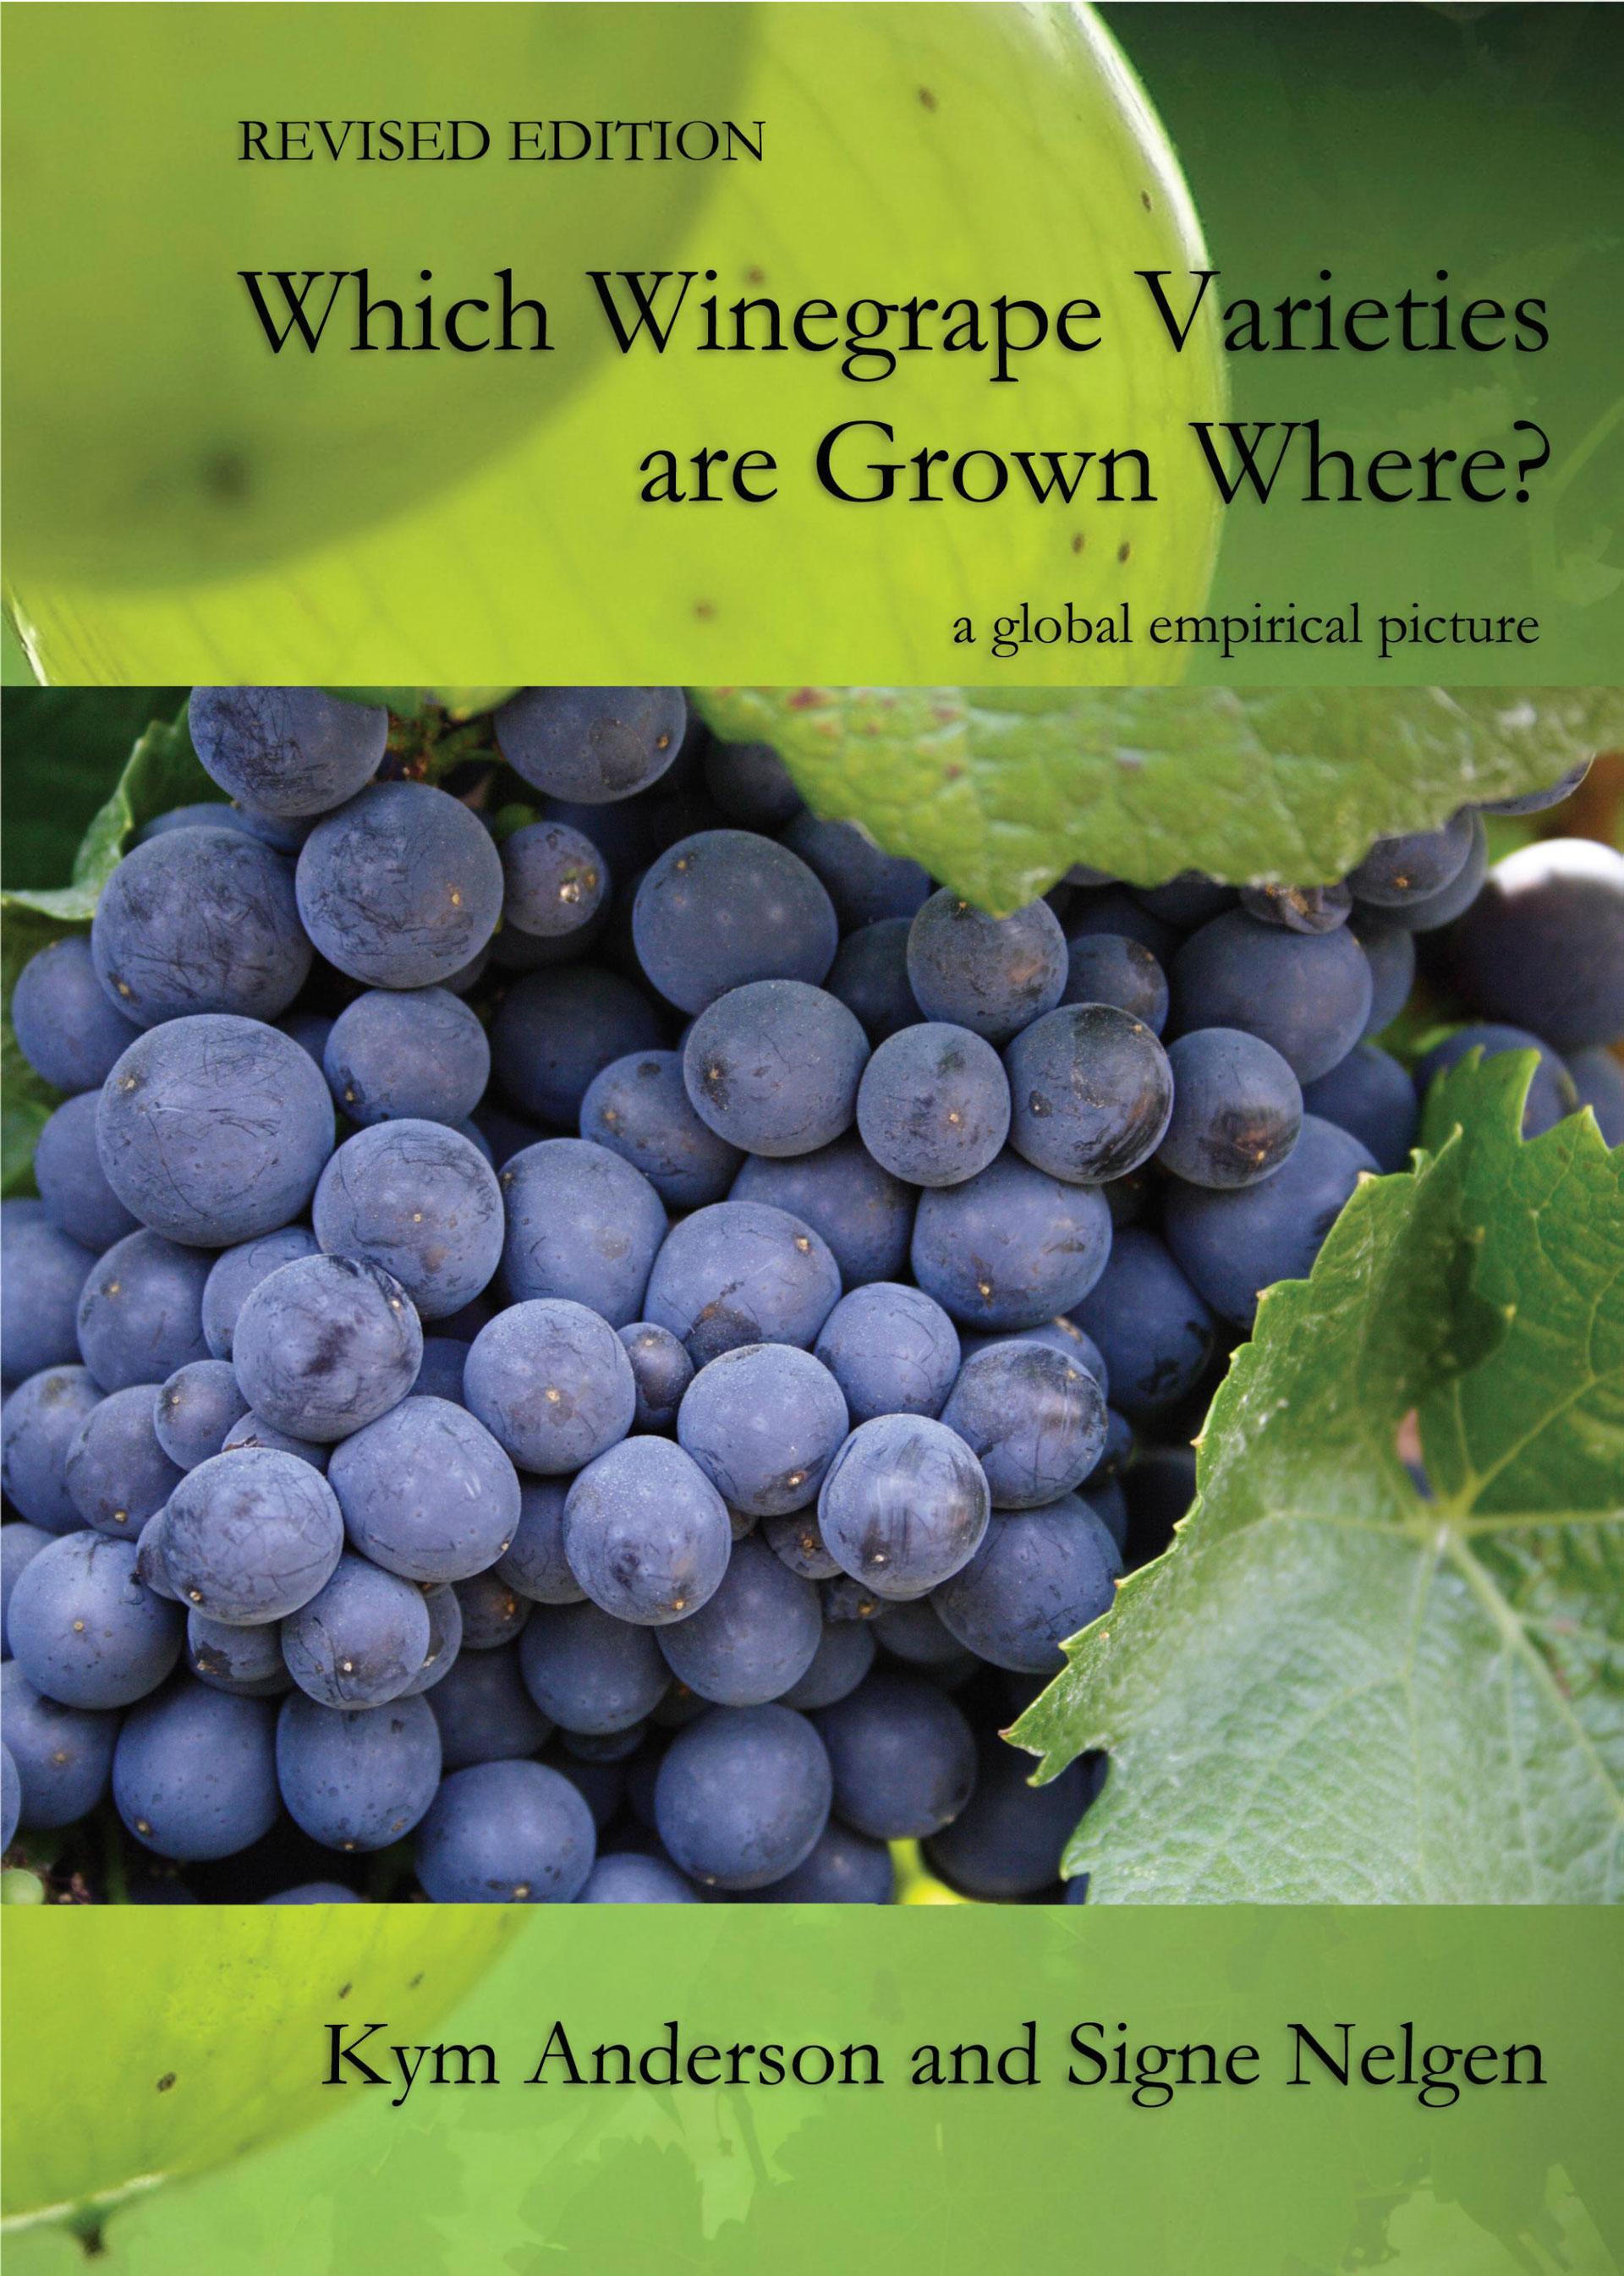 Book cover - Which Winegrape Varieties are Grown Where?